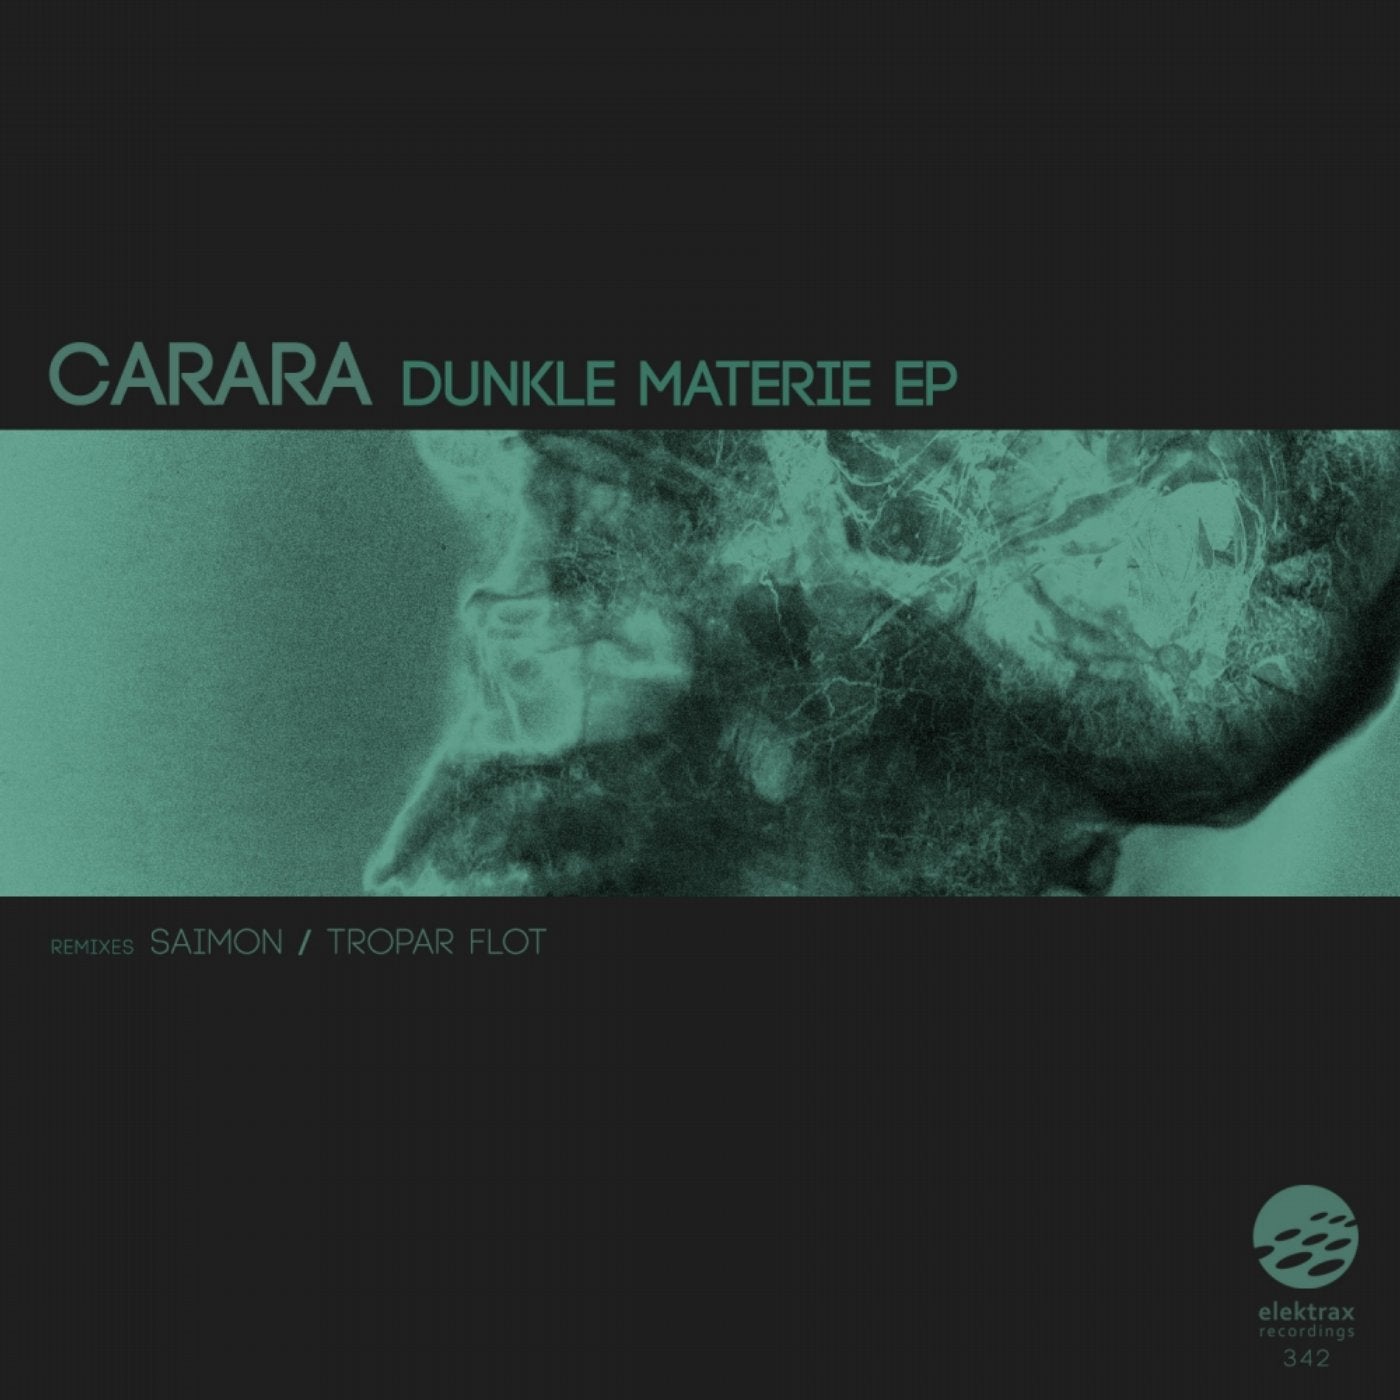 Dunkle Materie EP